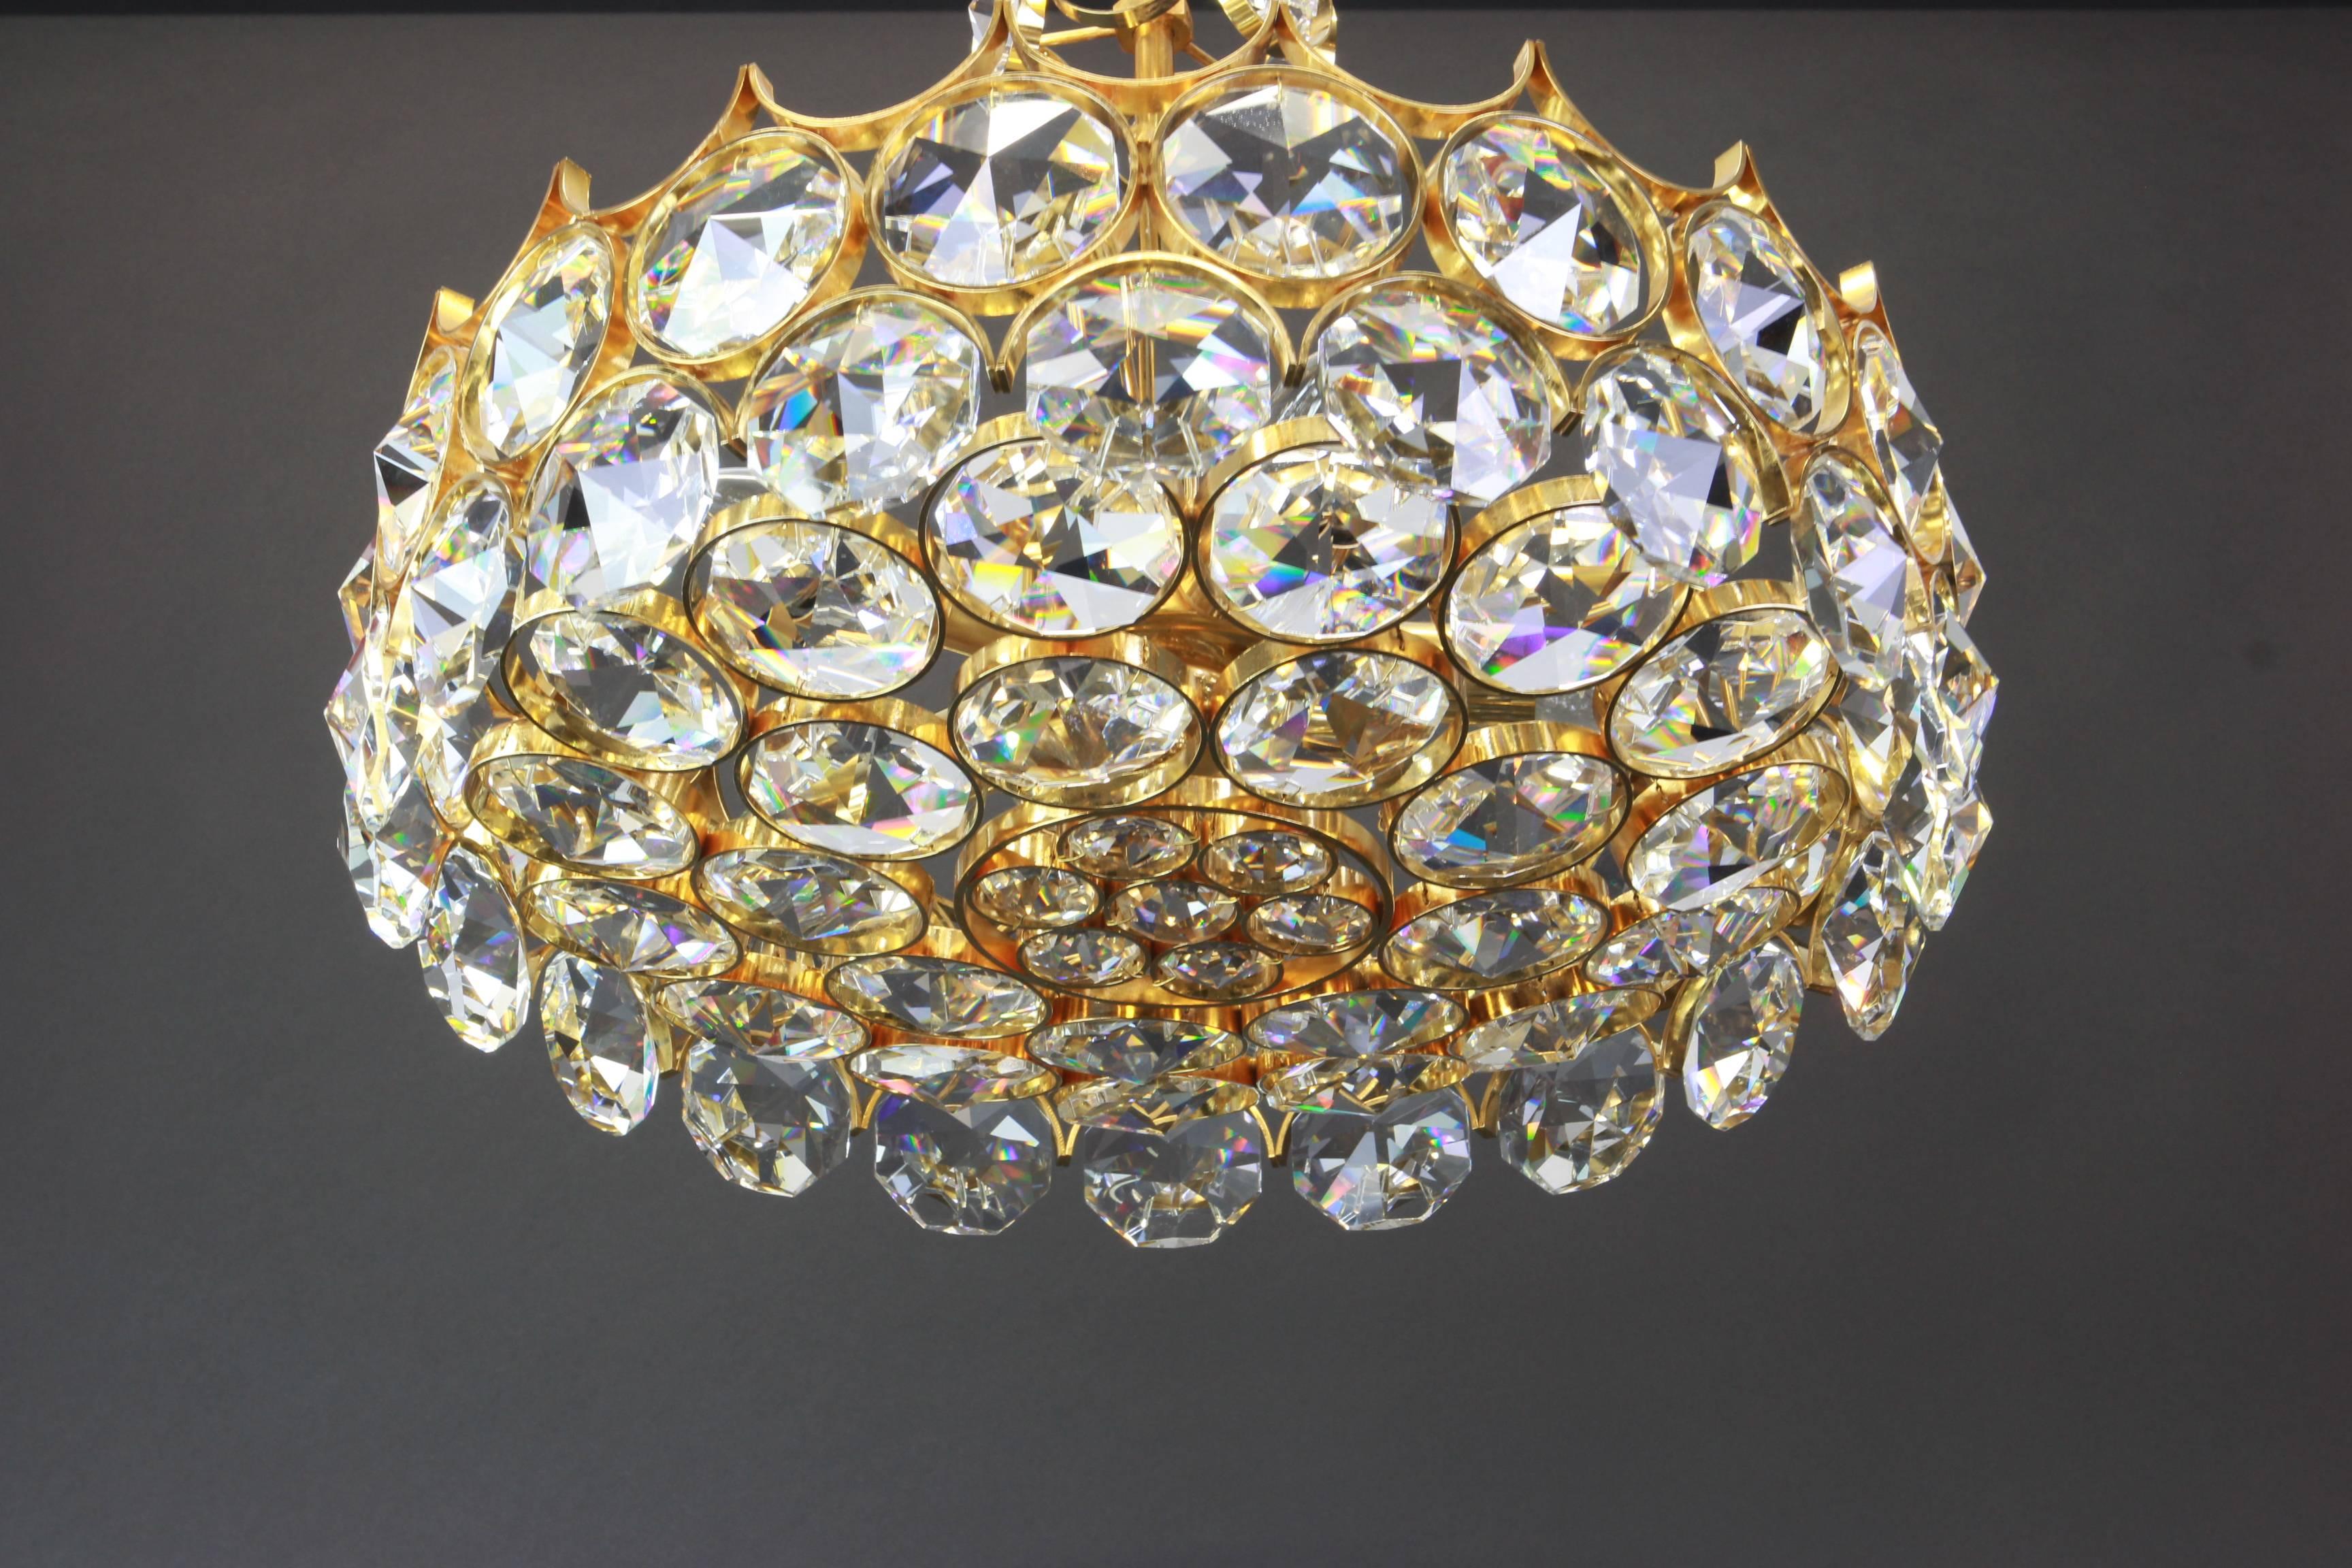 Gold Plate 1 of 2 Gilt Brass and Crystal Glass Chandeliers by Palwa, Germany, 1970s